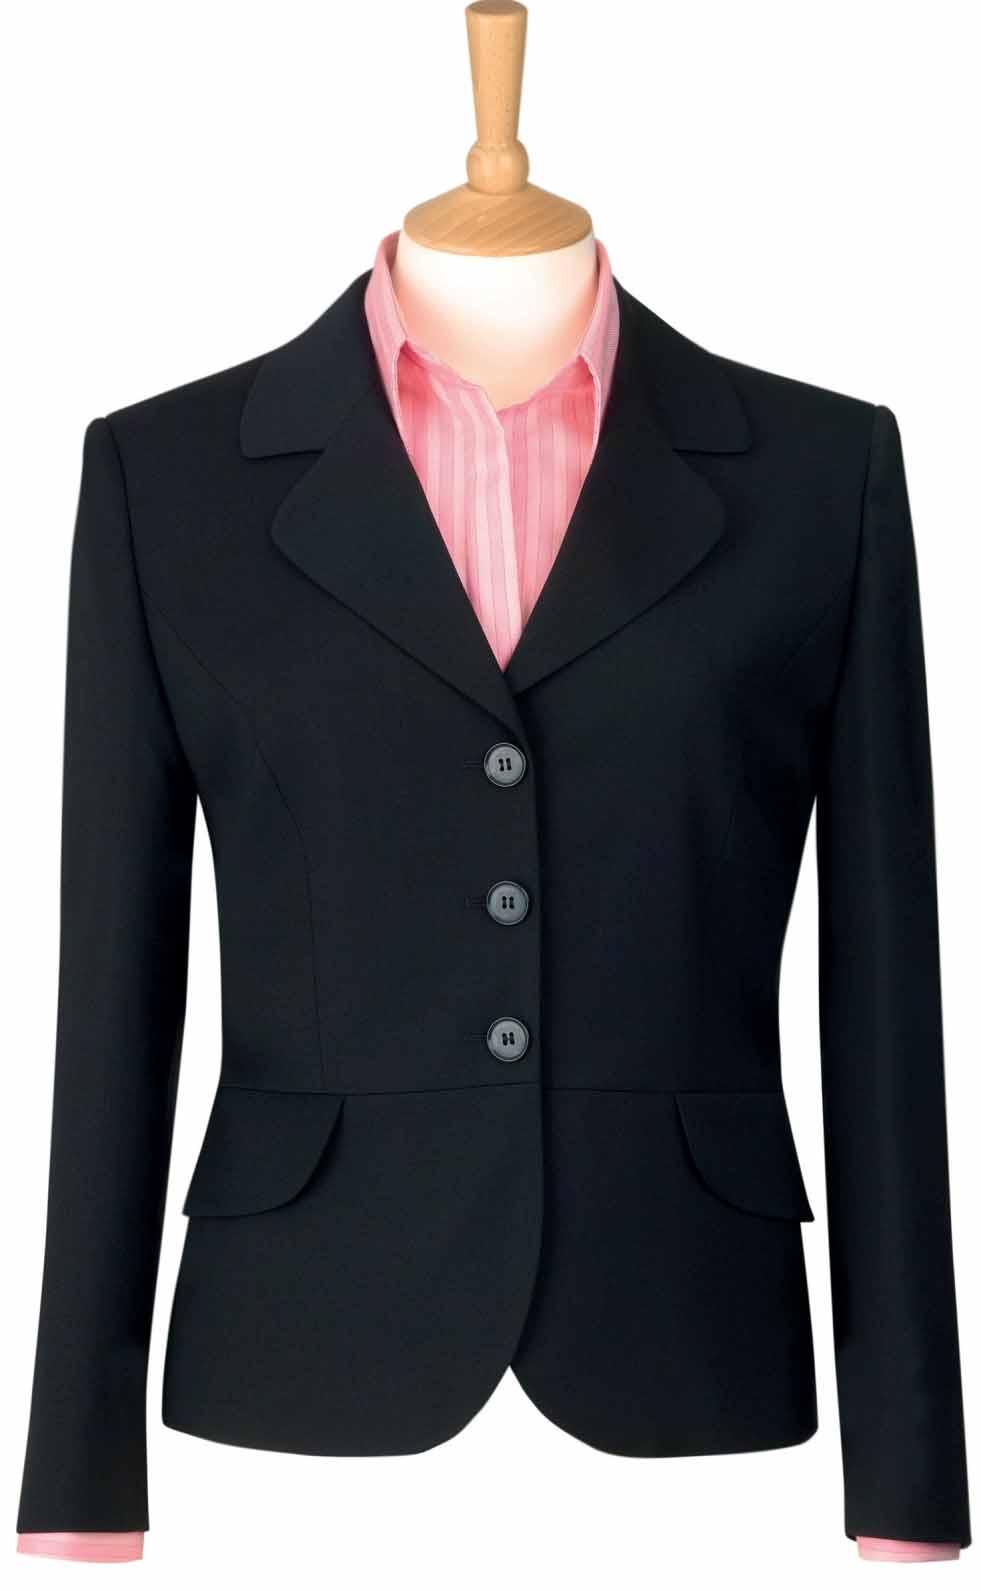 SOPHISTICATED Collection Susa Jacket (Black) 3 button jacket, rounded lapel and